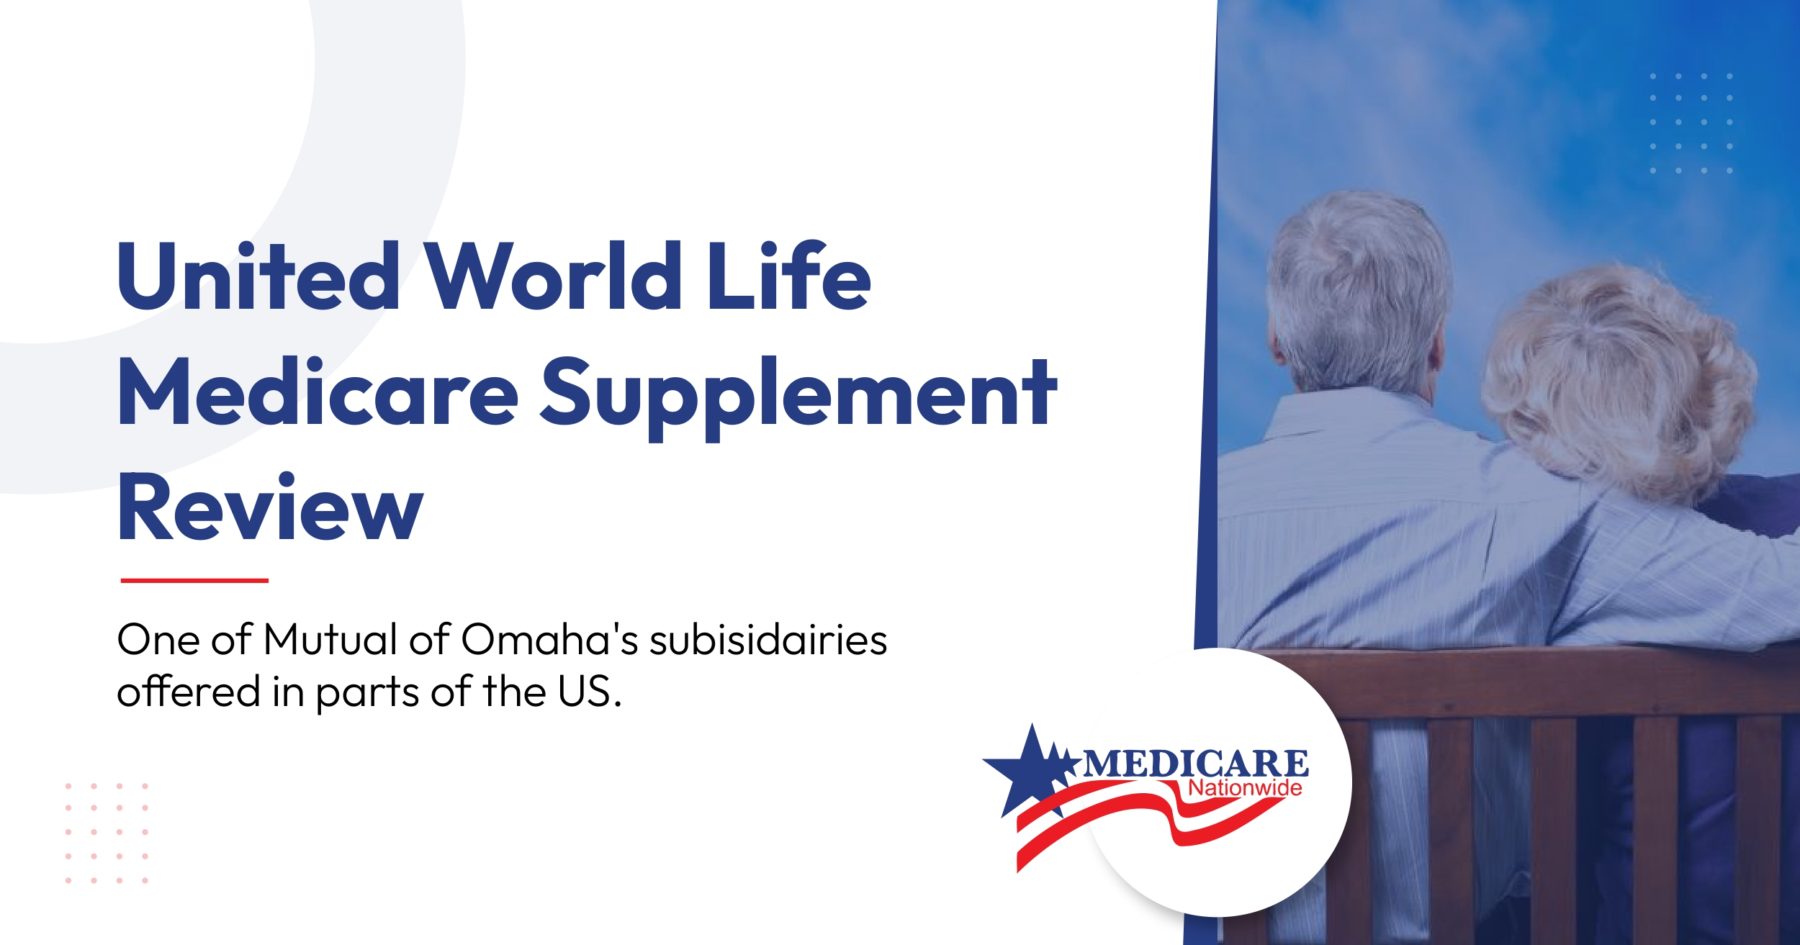 United World Life Medicare Supplement Review